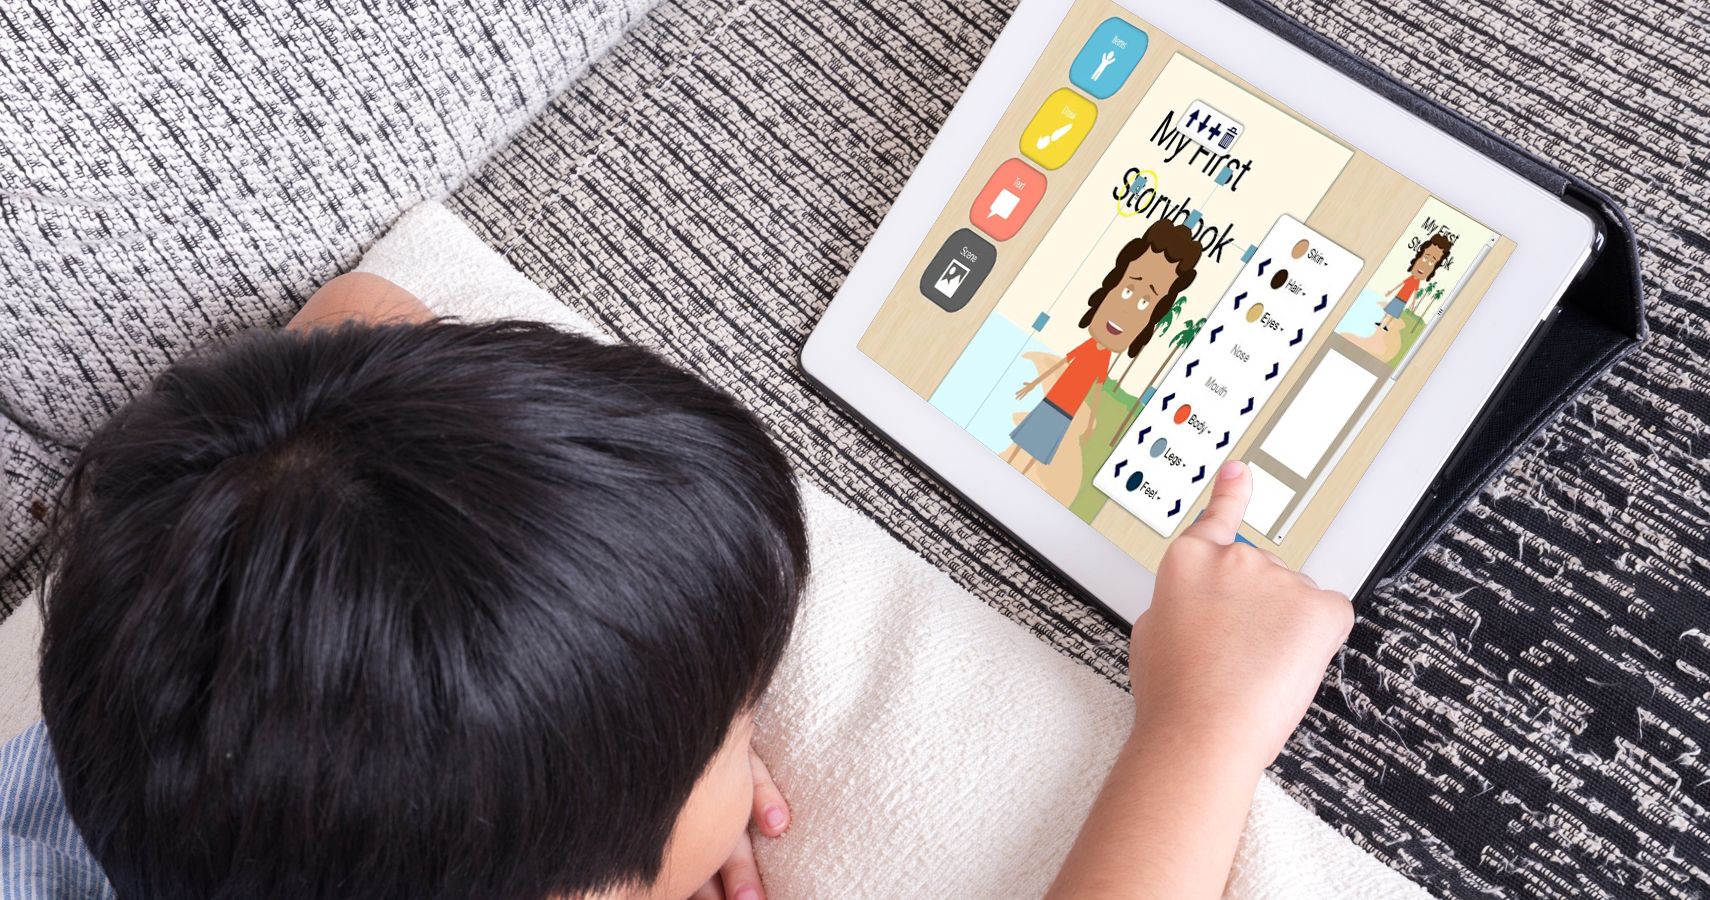 X Apps That Let Kids Make Their Own Story